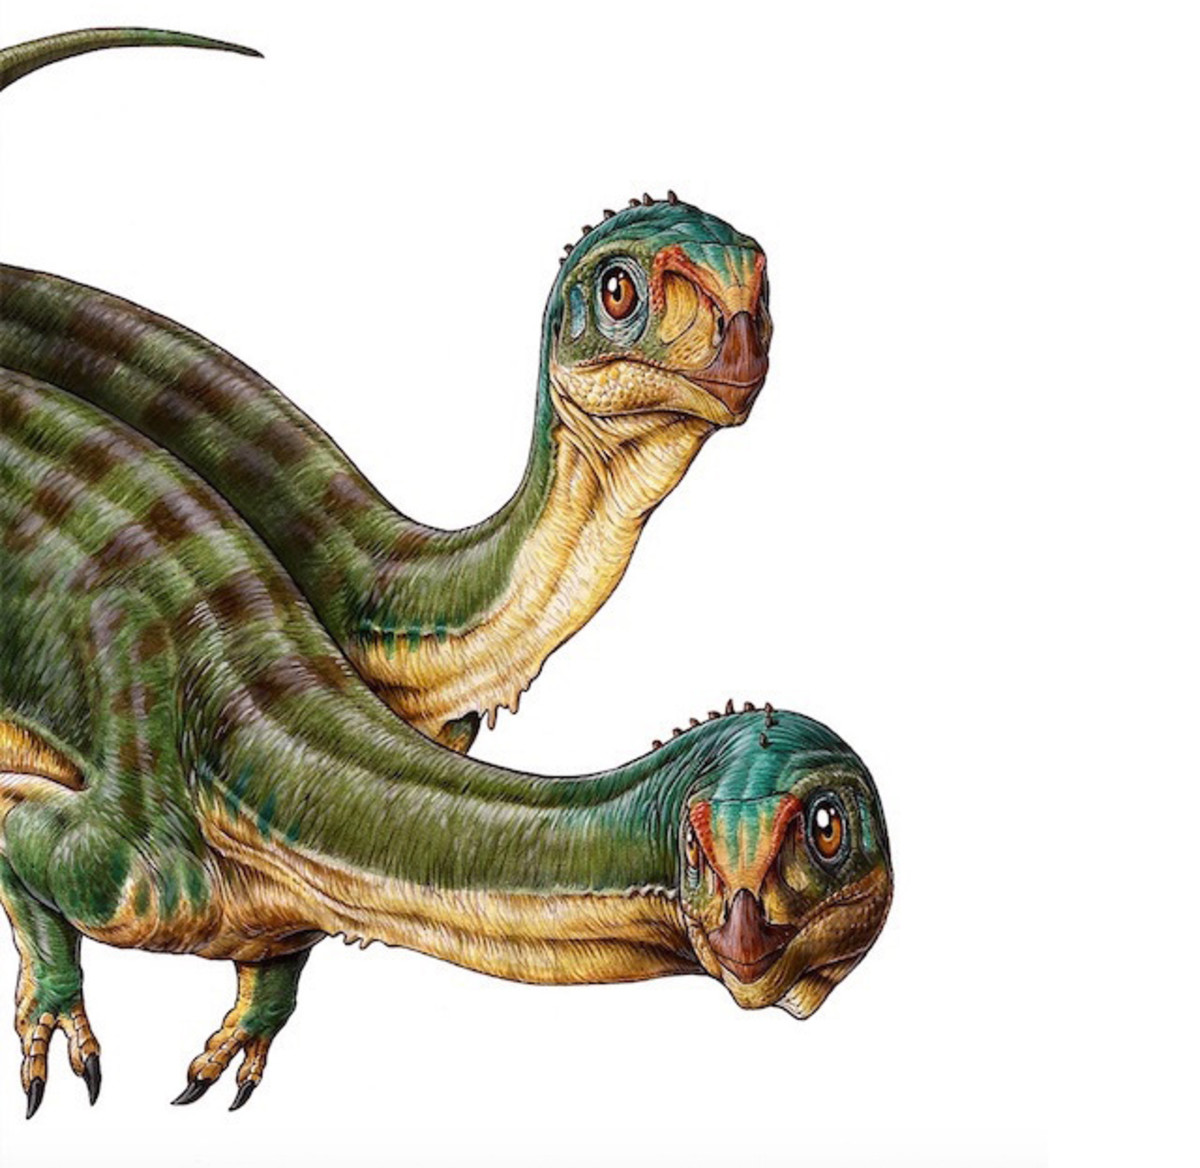 dinosaurs-of-the-year-2015-edition